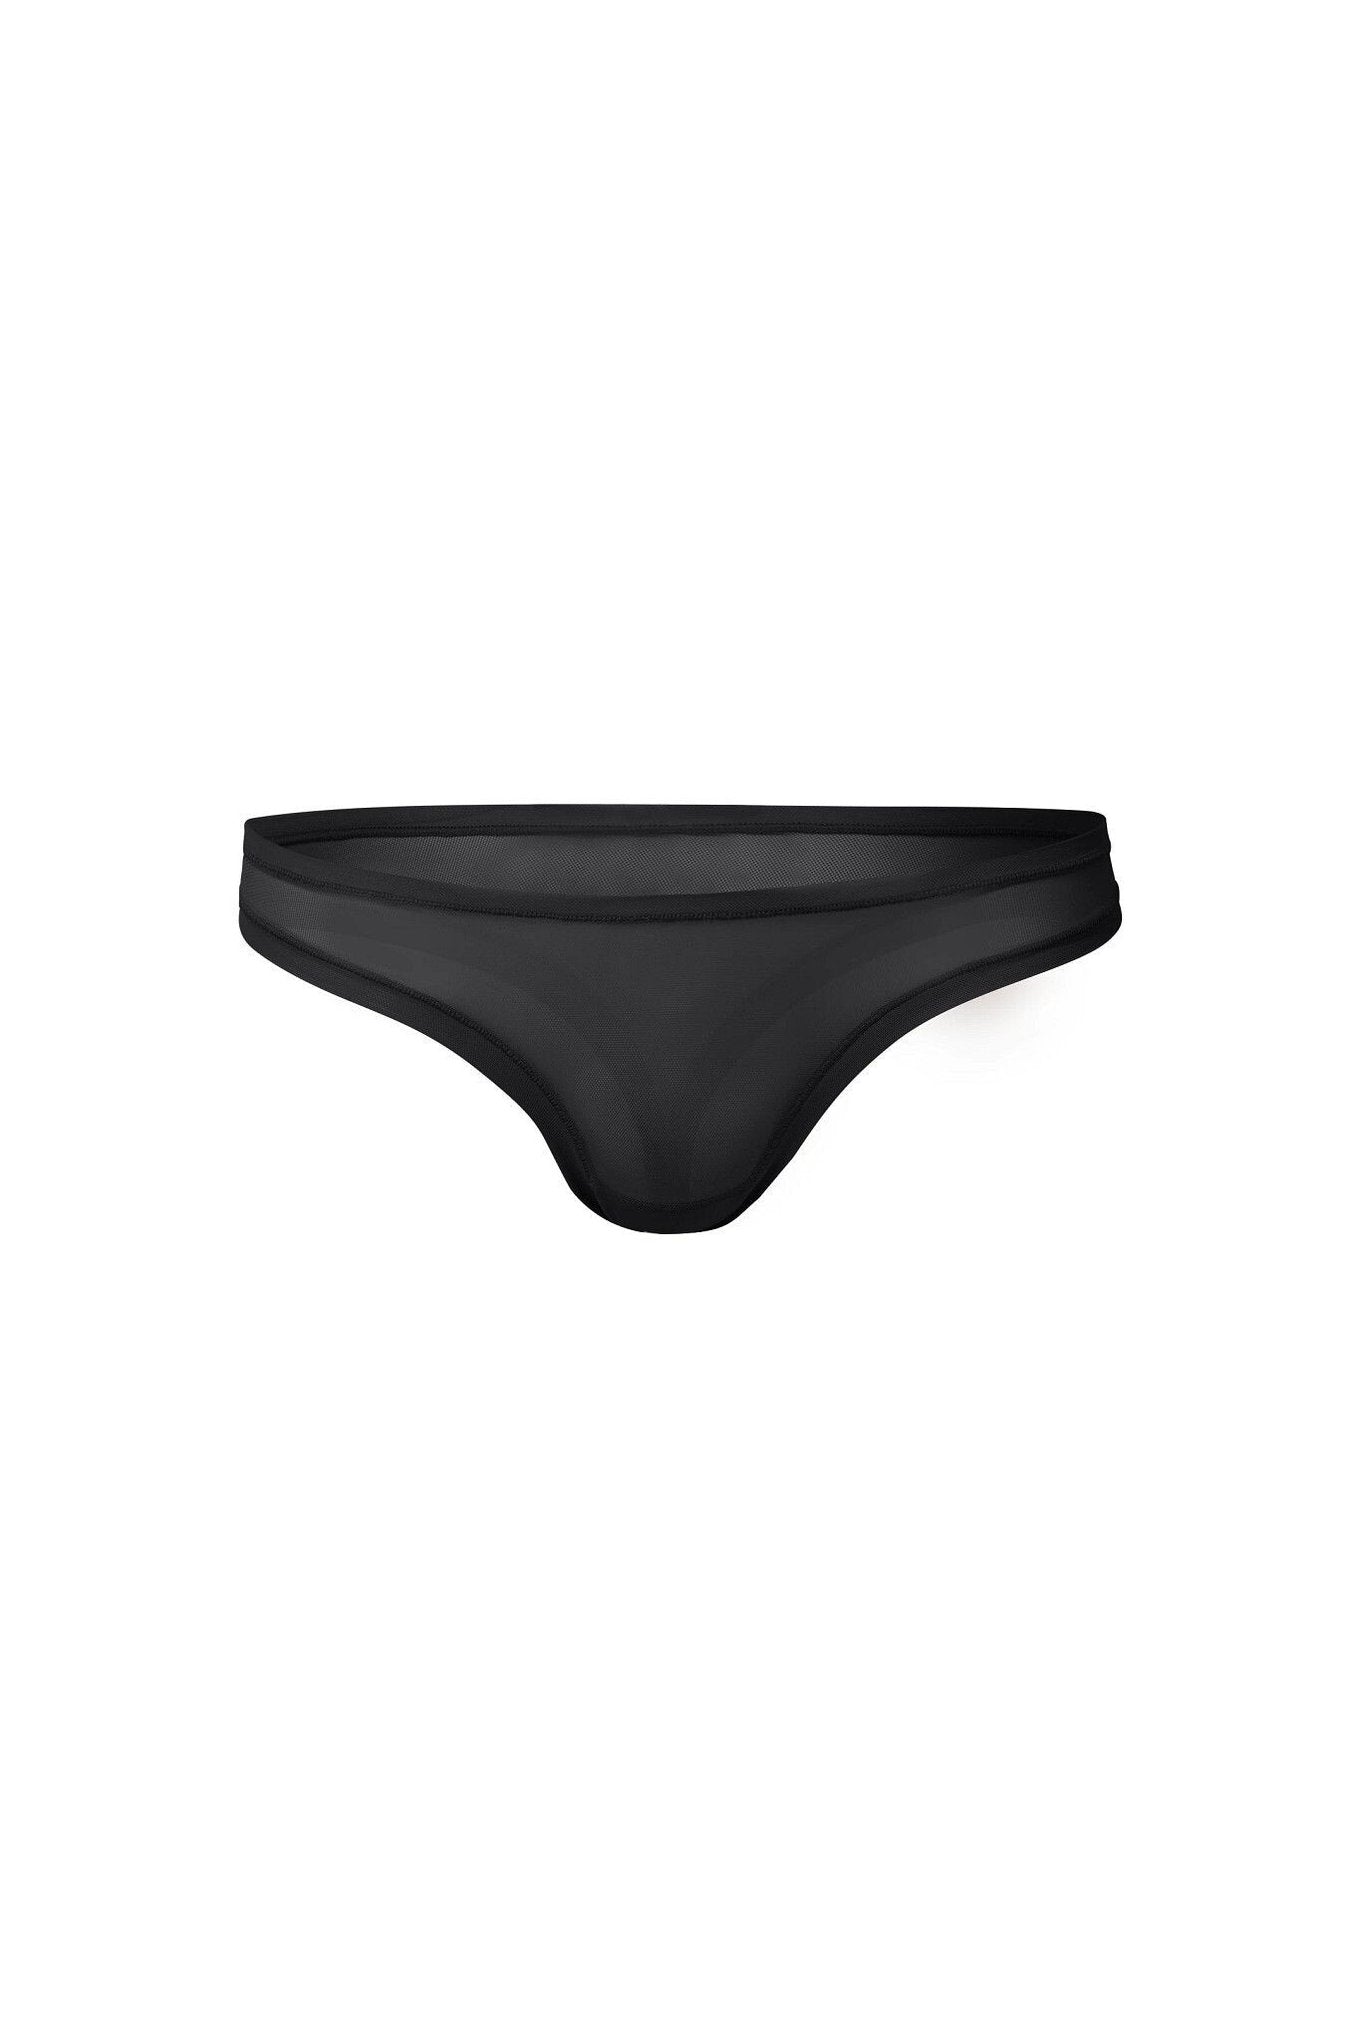 nueskin Bonnie Mesh Low-Rise Thong in color Jet Black and shape thong